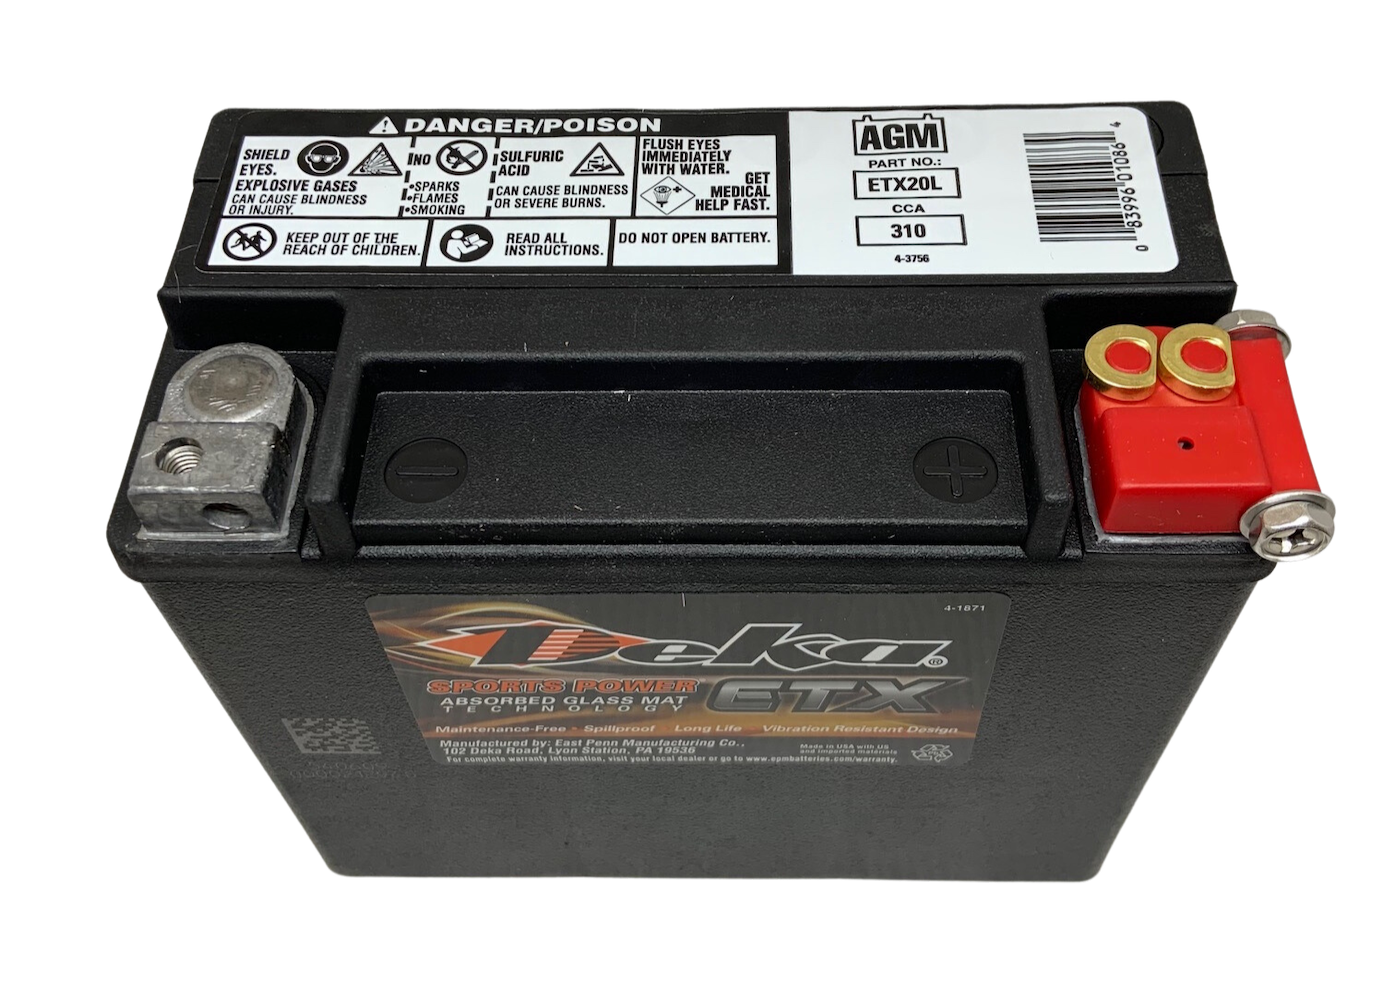 Seeking a 6598997a battery replacement for my 1997 FLSTS Harley Davidson?